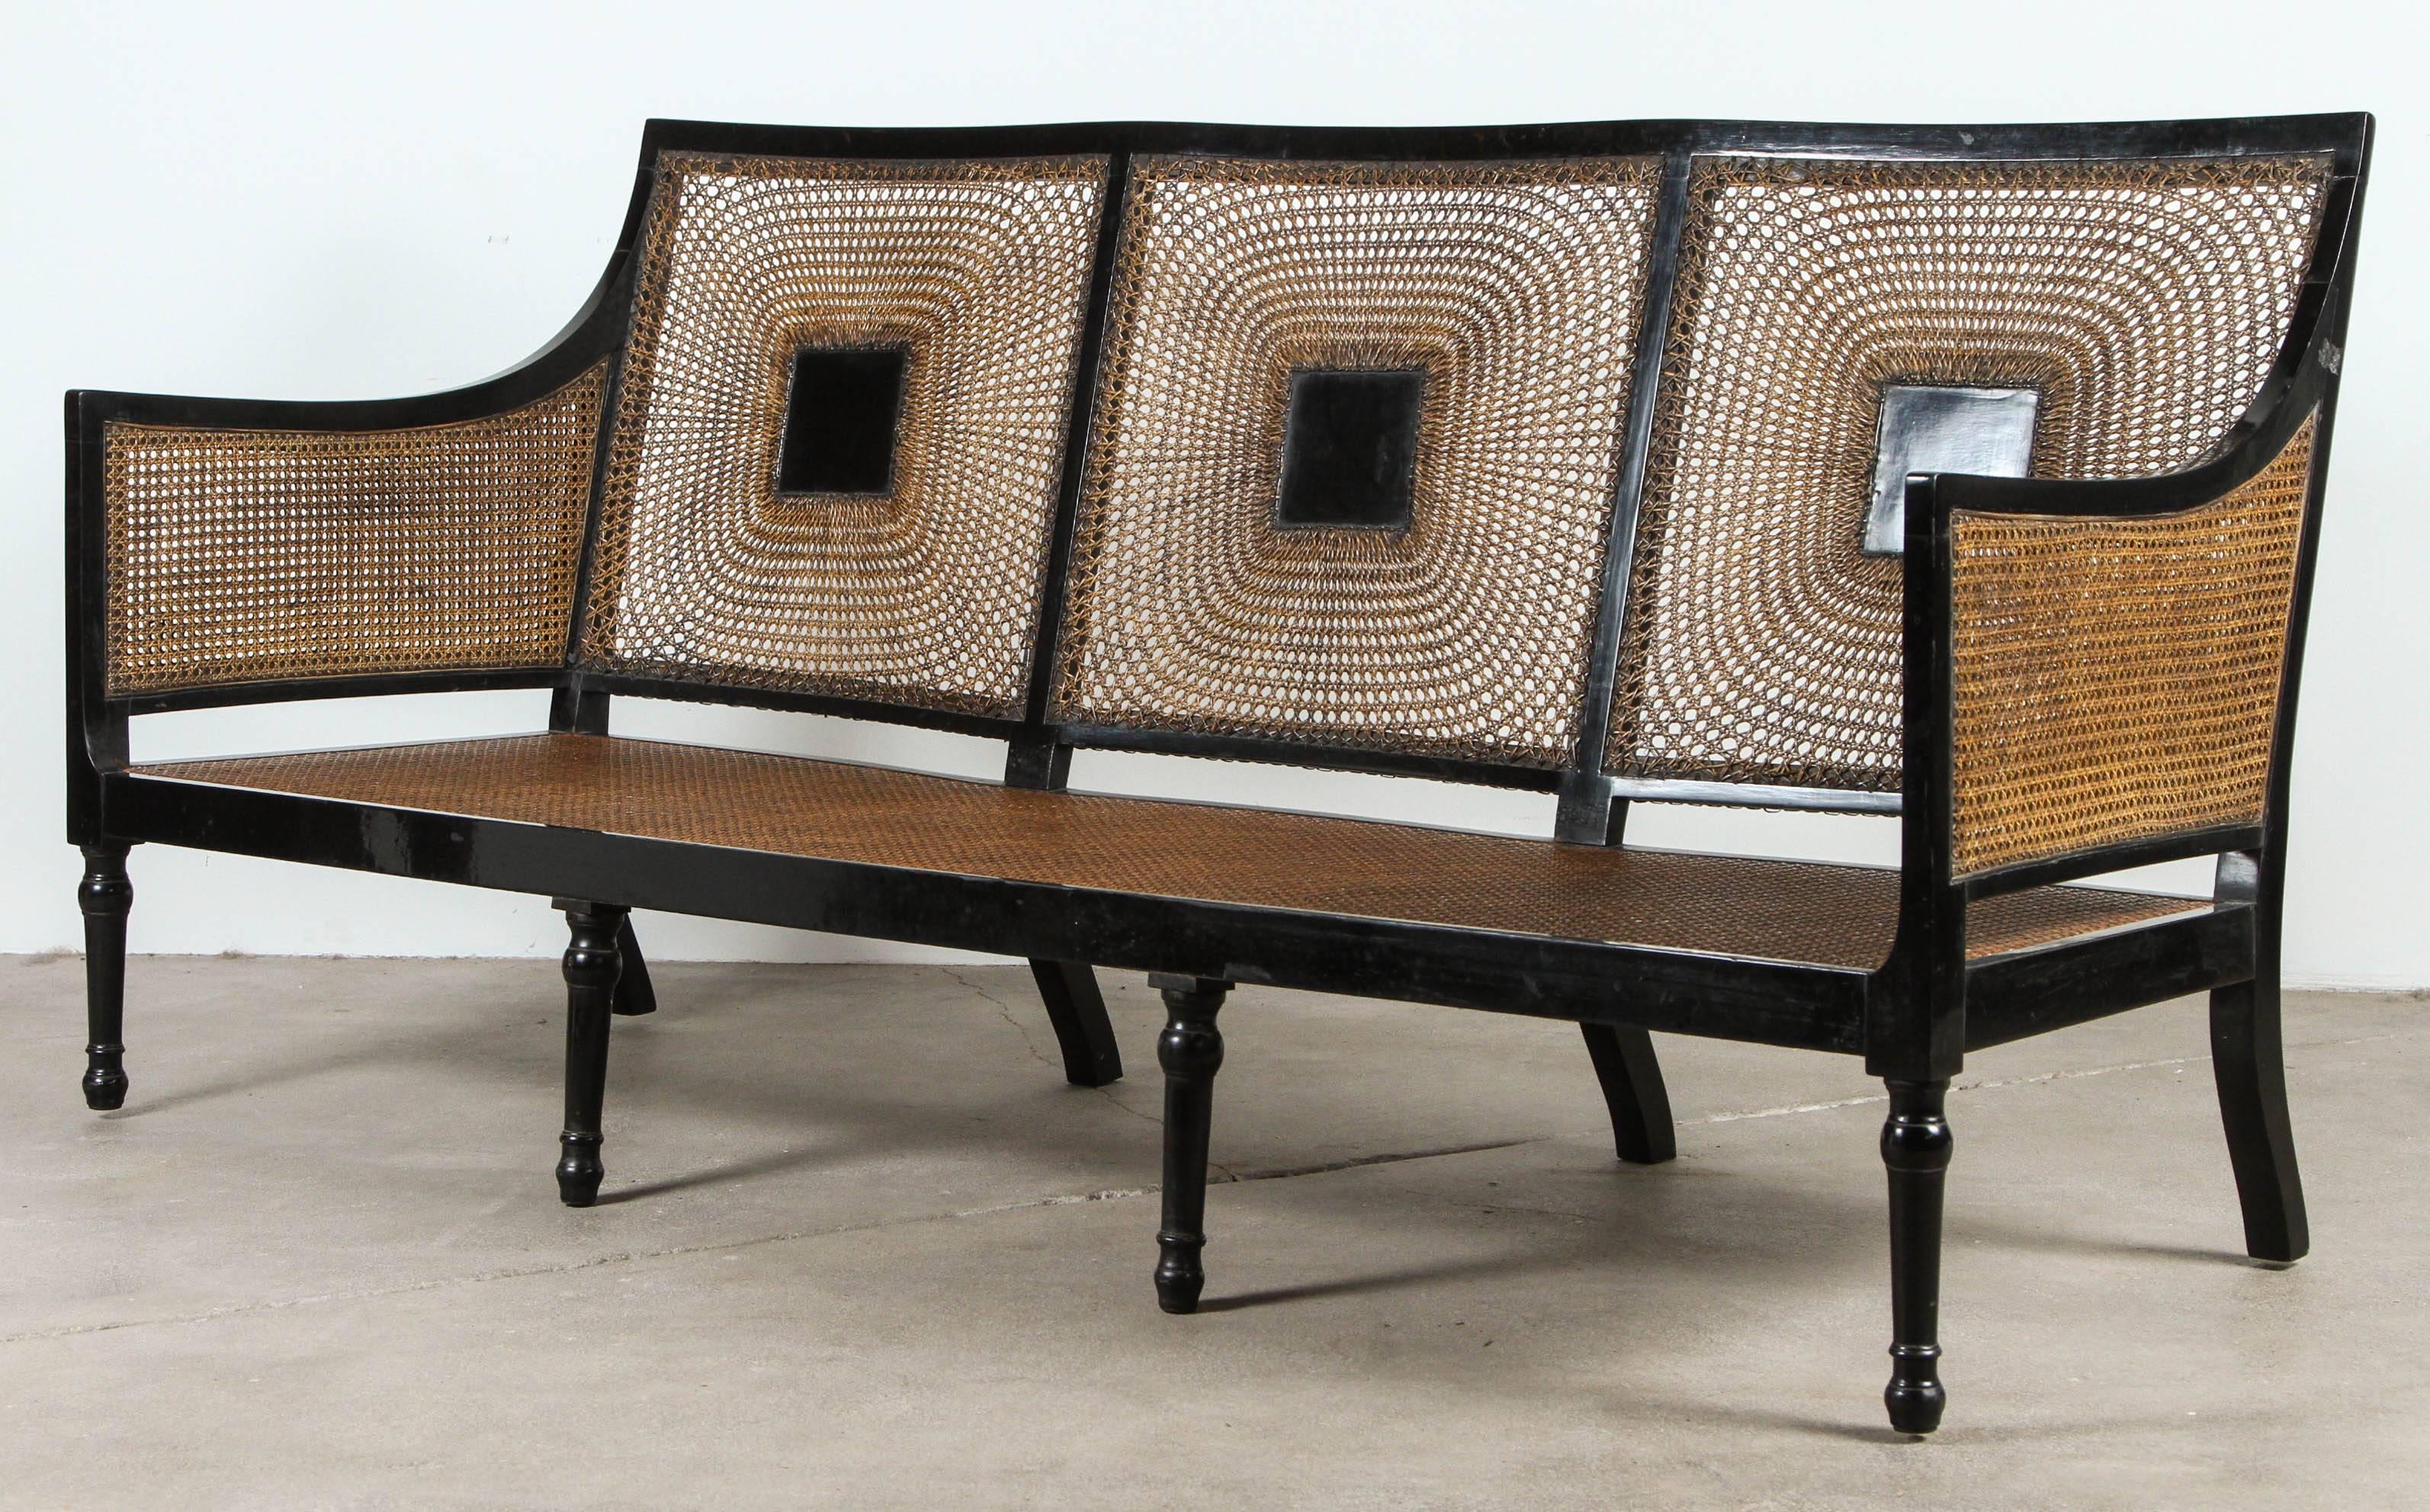 20th Century Italian Black Framed Lacquered Caned Bench